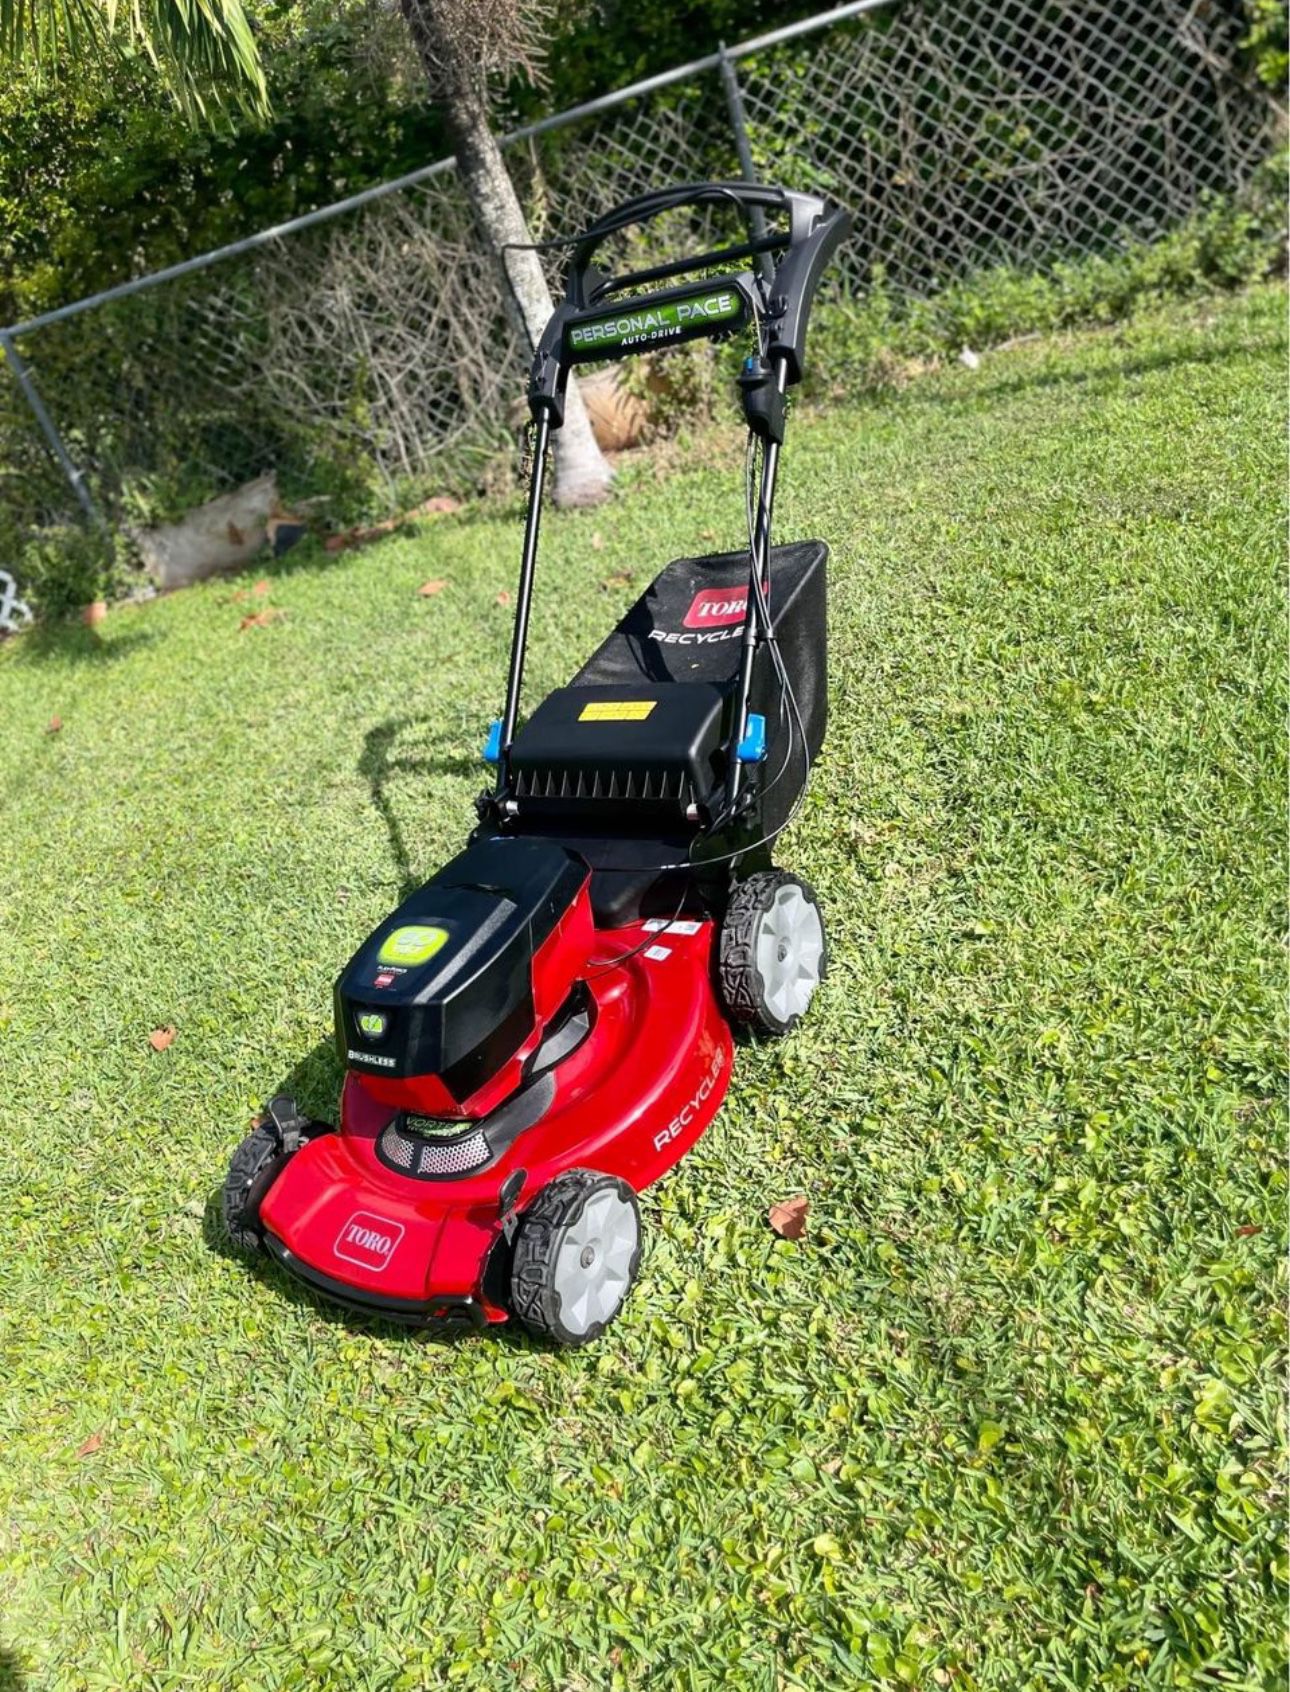 🔥New Toro Self-Propelled Lawn Mower Kit (Battery & Charger) included